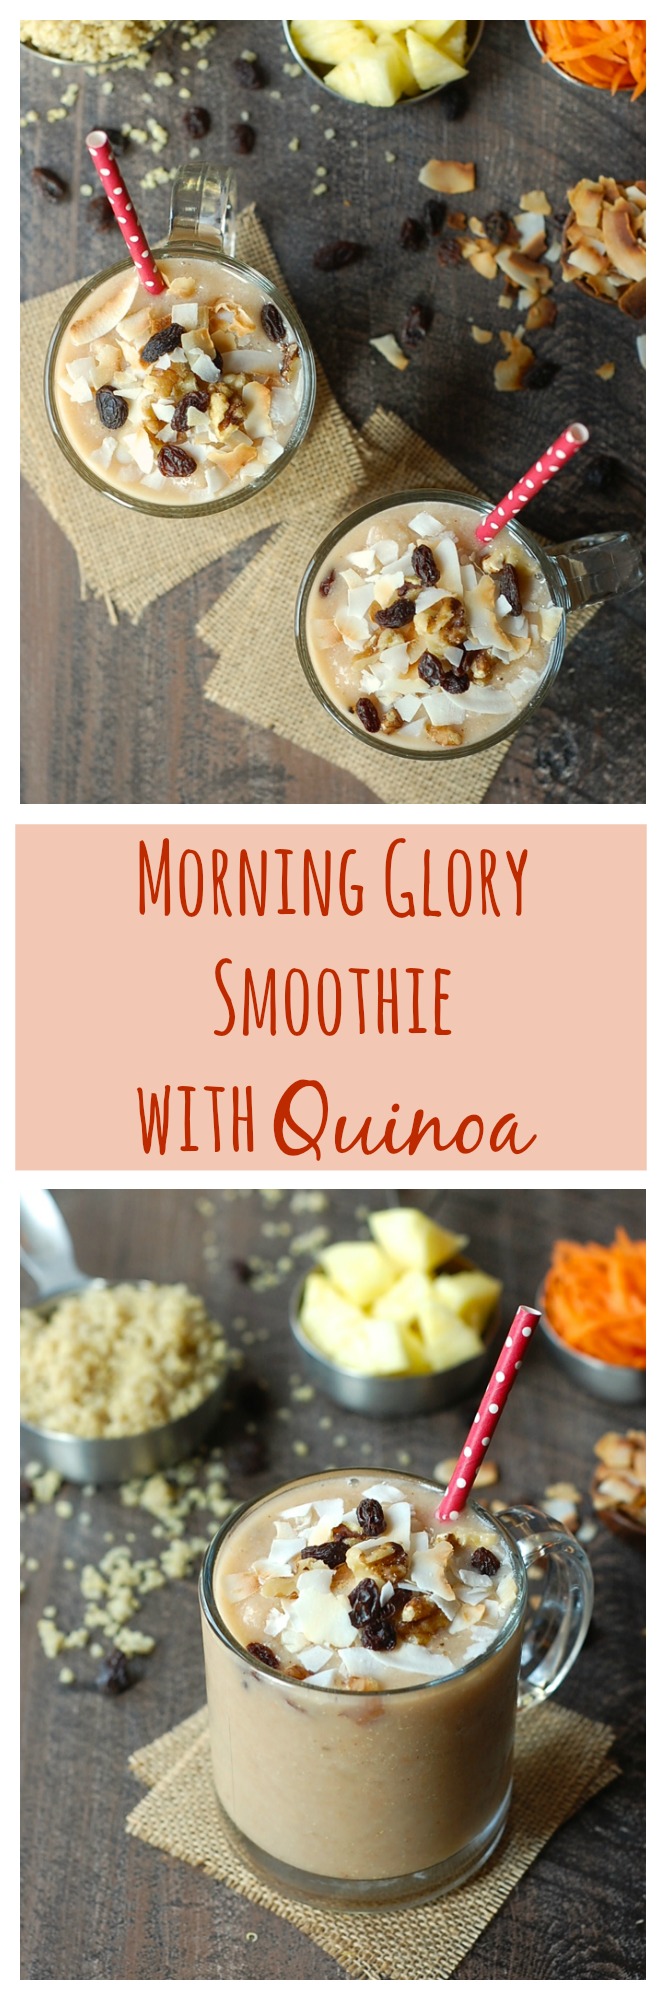 All the flavors of a morning glory muffin (carrot, pineapple, coconut, raisins, and walnuts) in a delicious, vegan, gluten-free smoothie. It's made extra healthy with a surprise ingredient--quinoa!